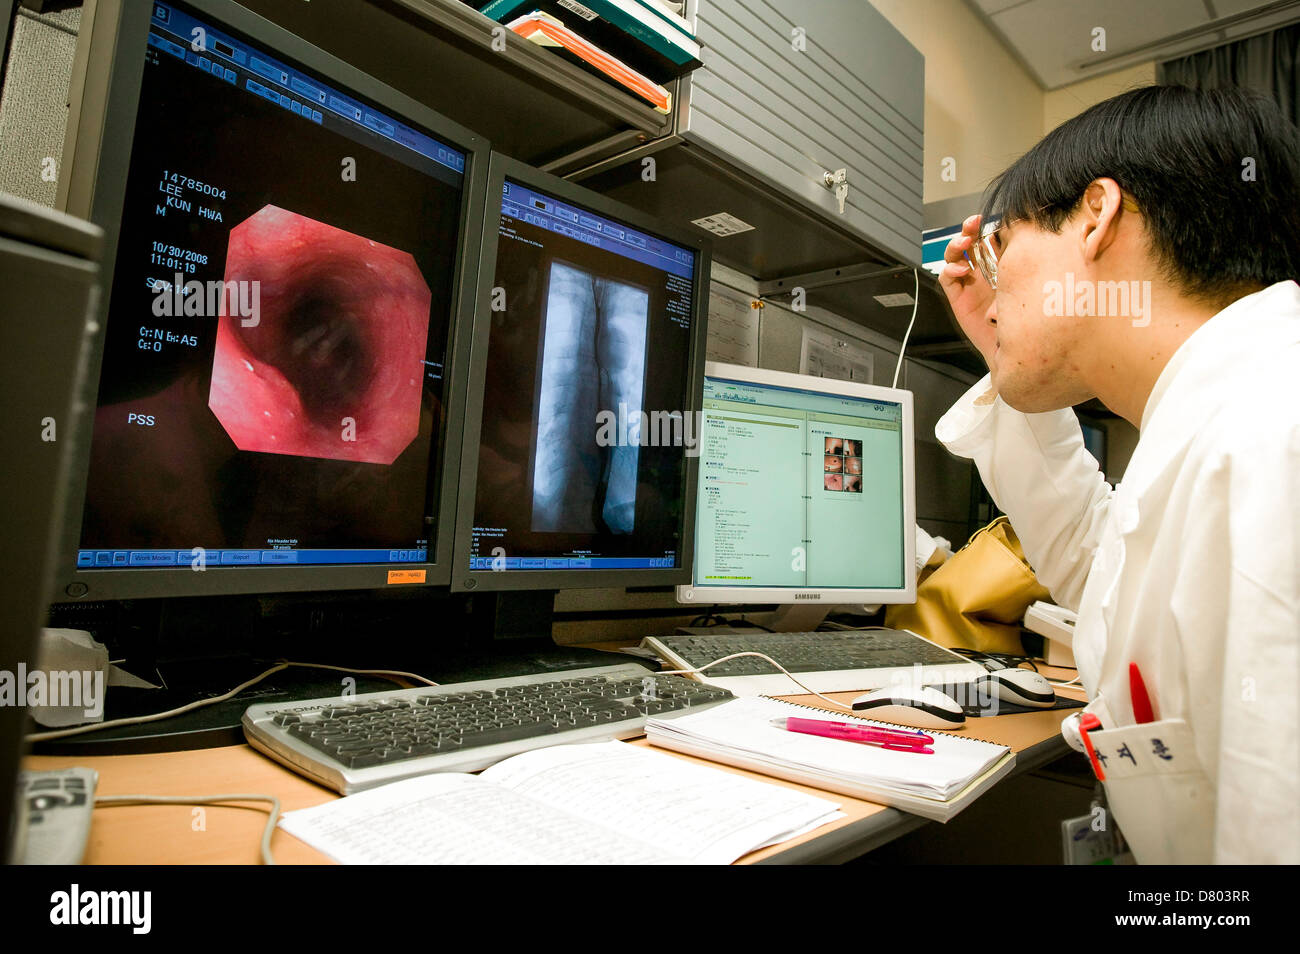 A doctor views endoscopic images, as part of patient diagnosis, in the Reading Room, in a Medical Centre. Stock Photo